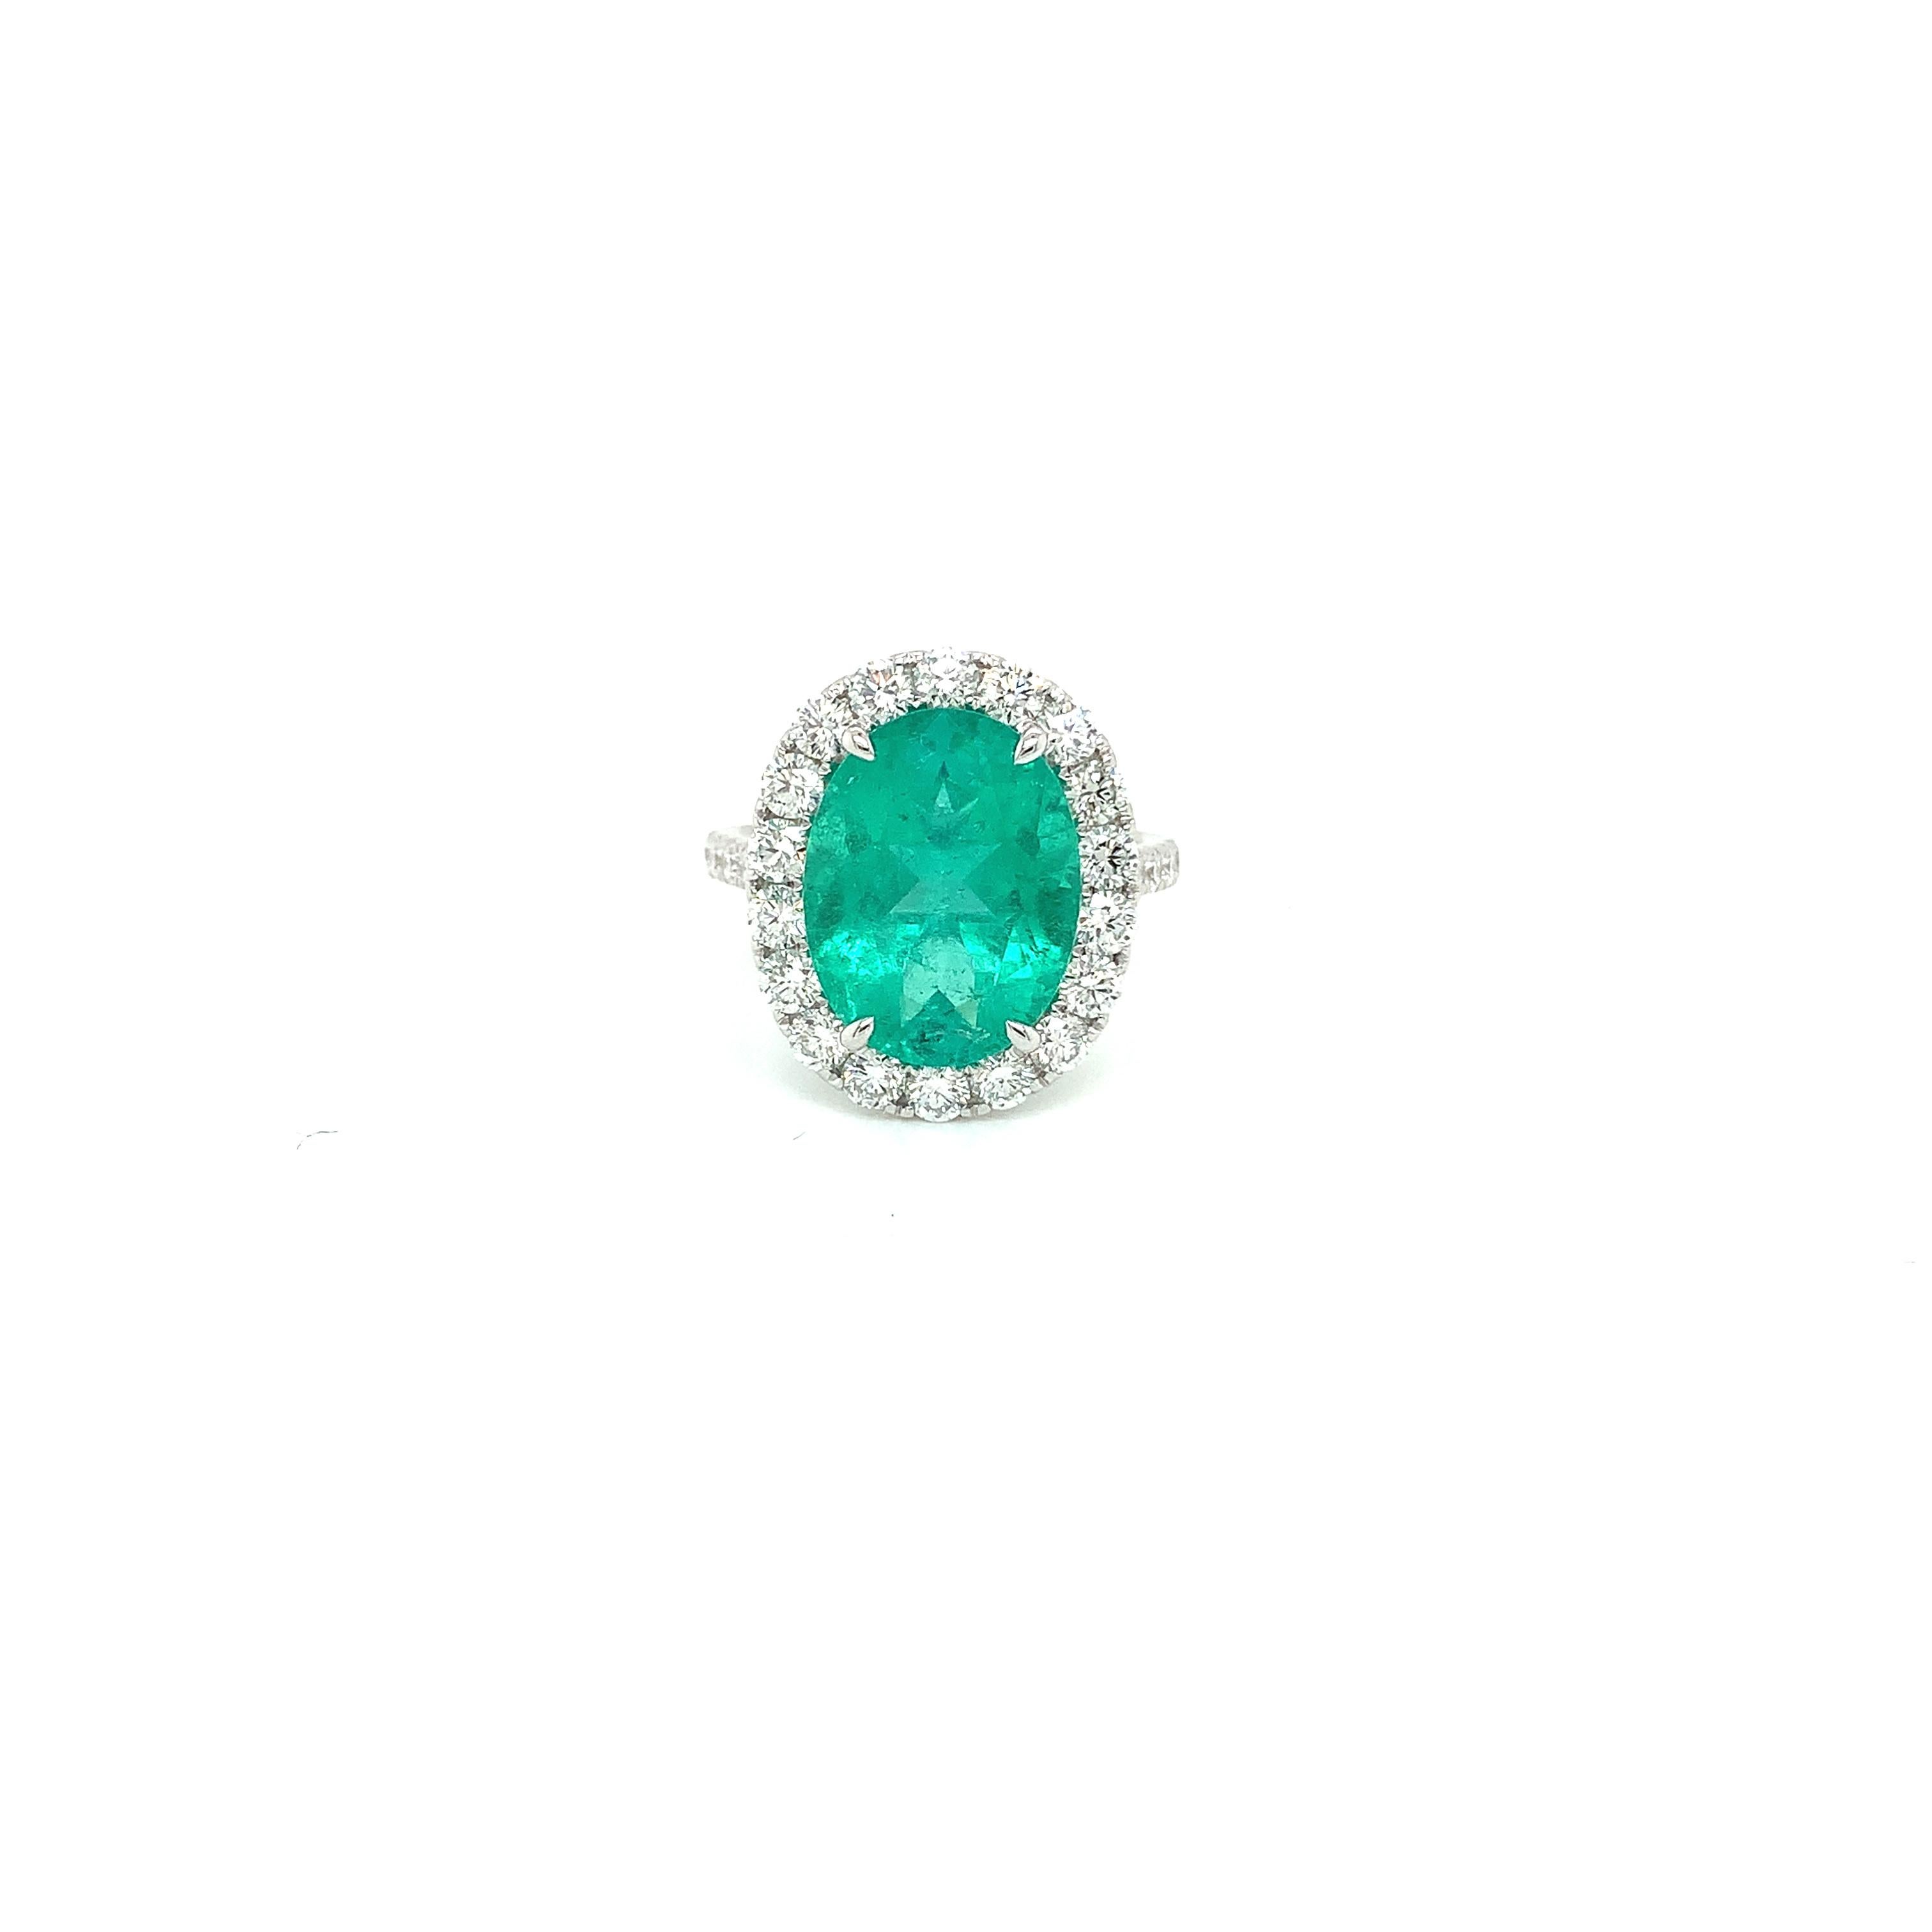 Oval Colombian Emerald weighing 5.45 cts    
Measuring (13.75x10.60x7.05) mm              
Diamonds weighing 1.40 cts                                              
Set in 18K white gold ring
4.77 grams